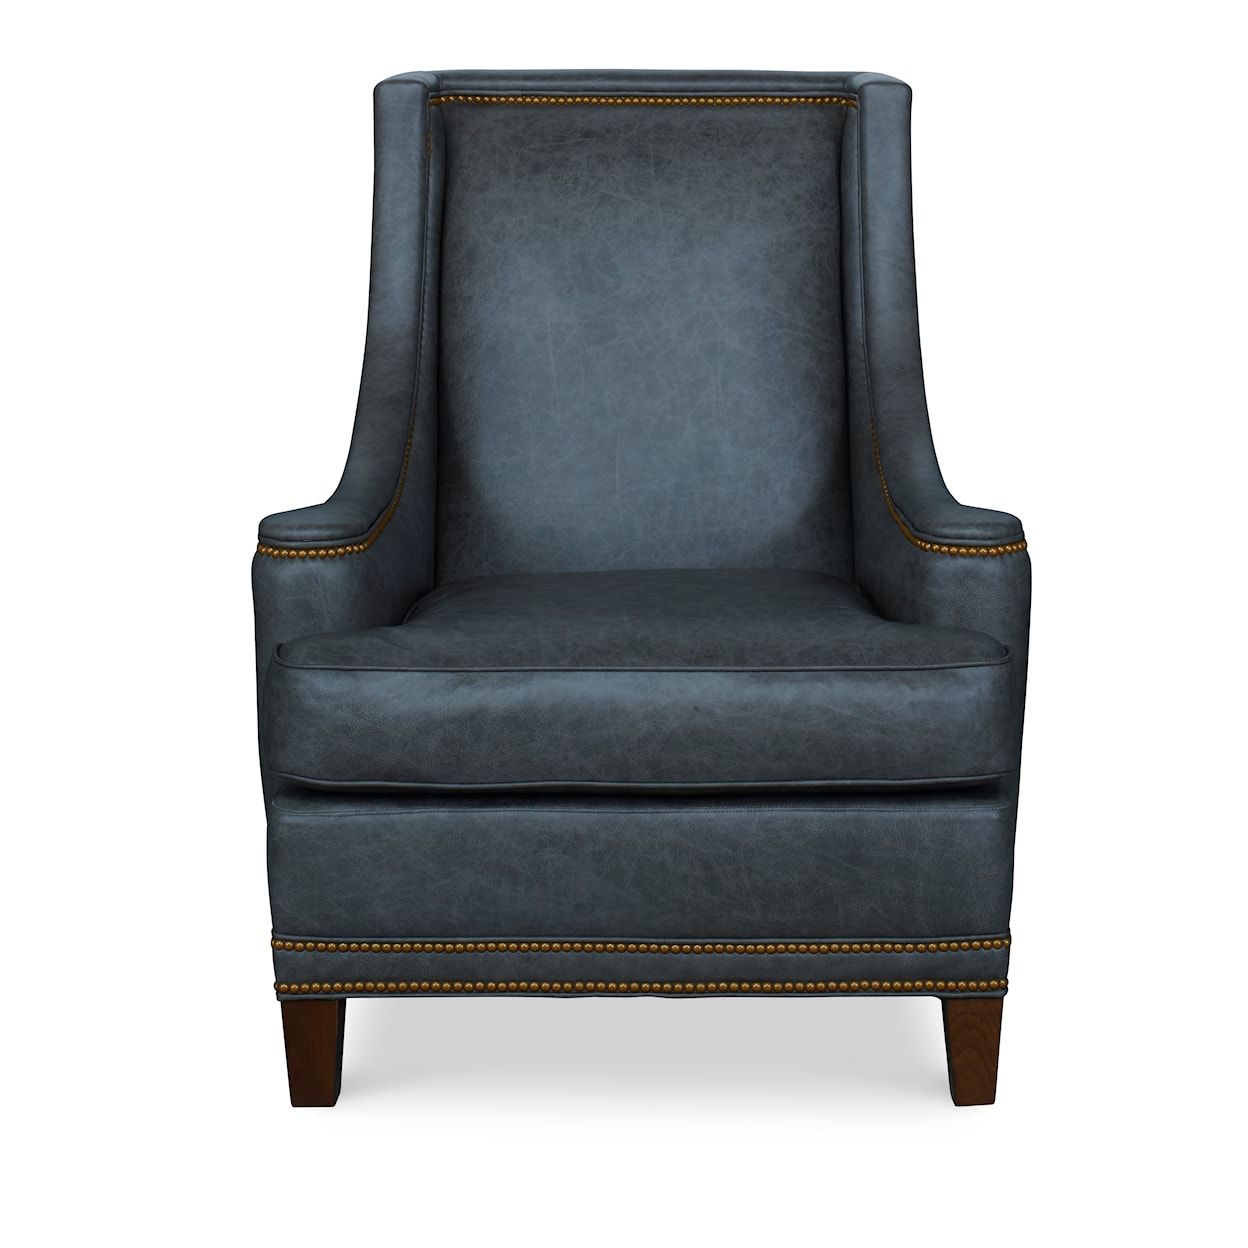 Century Leather Stone Accent Chair